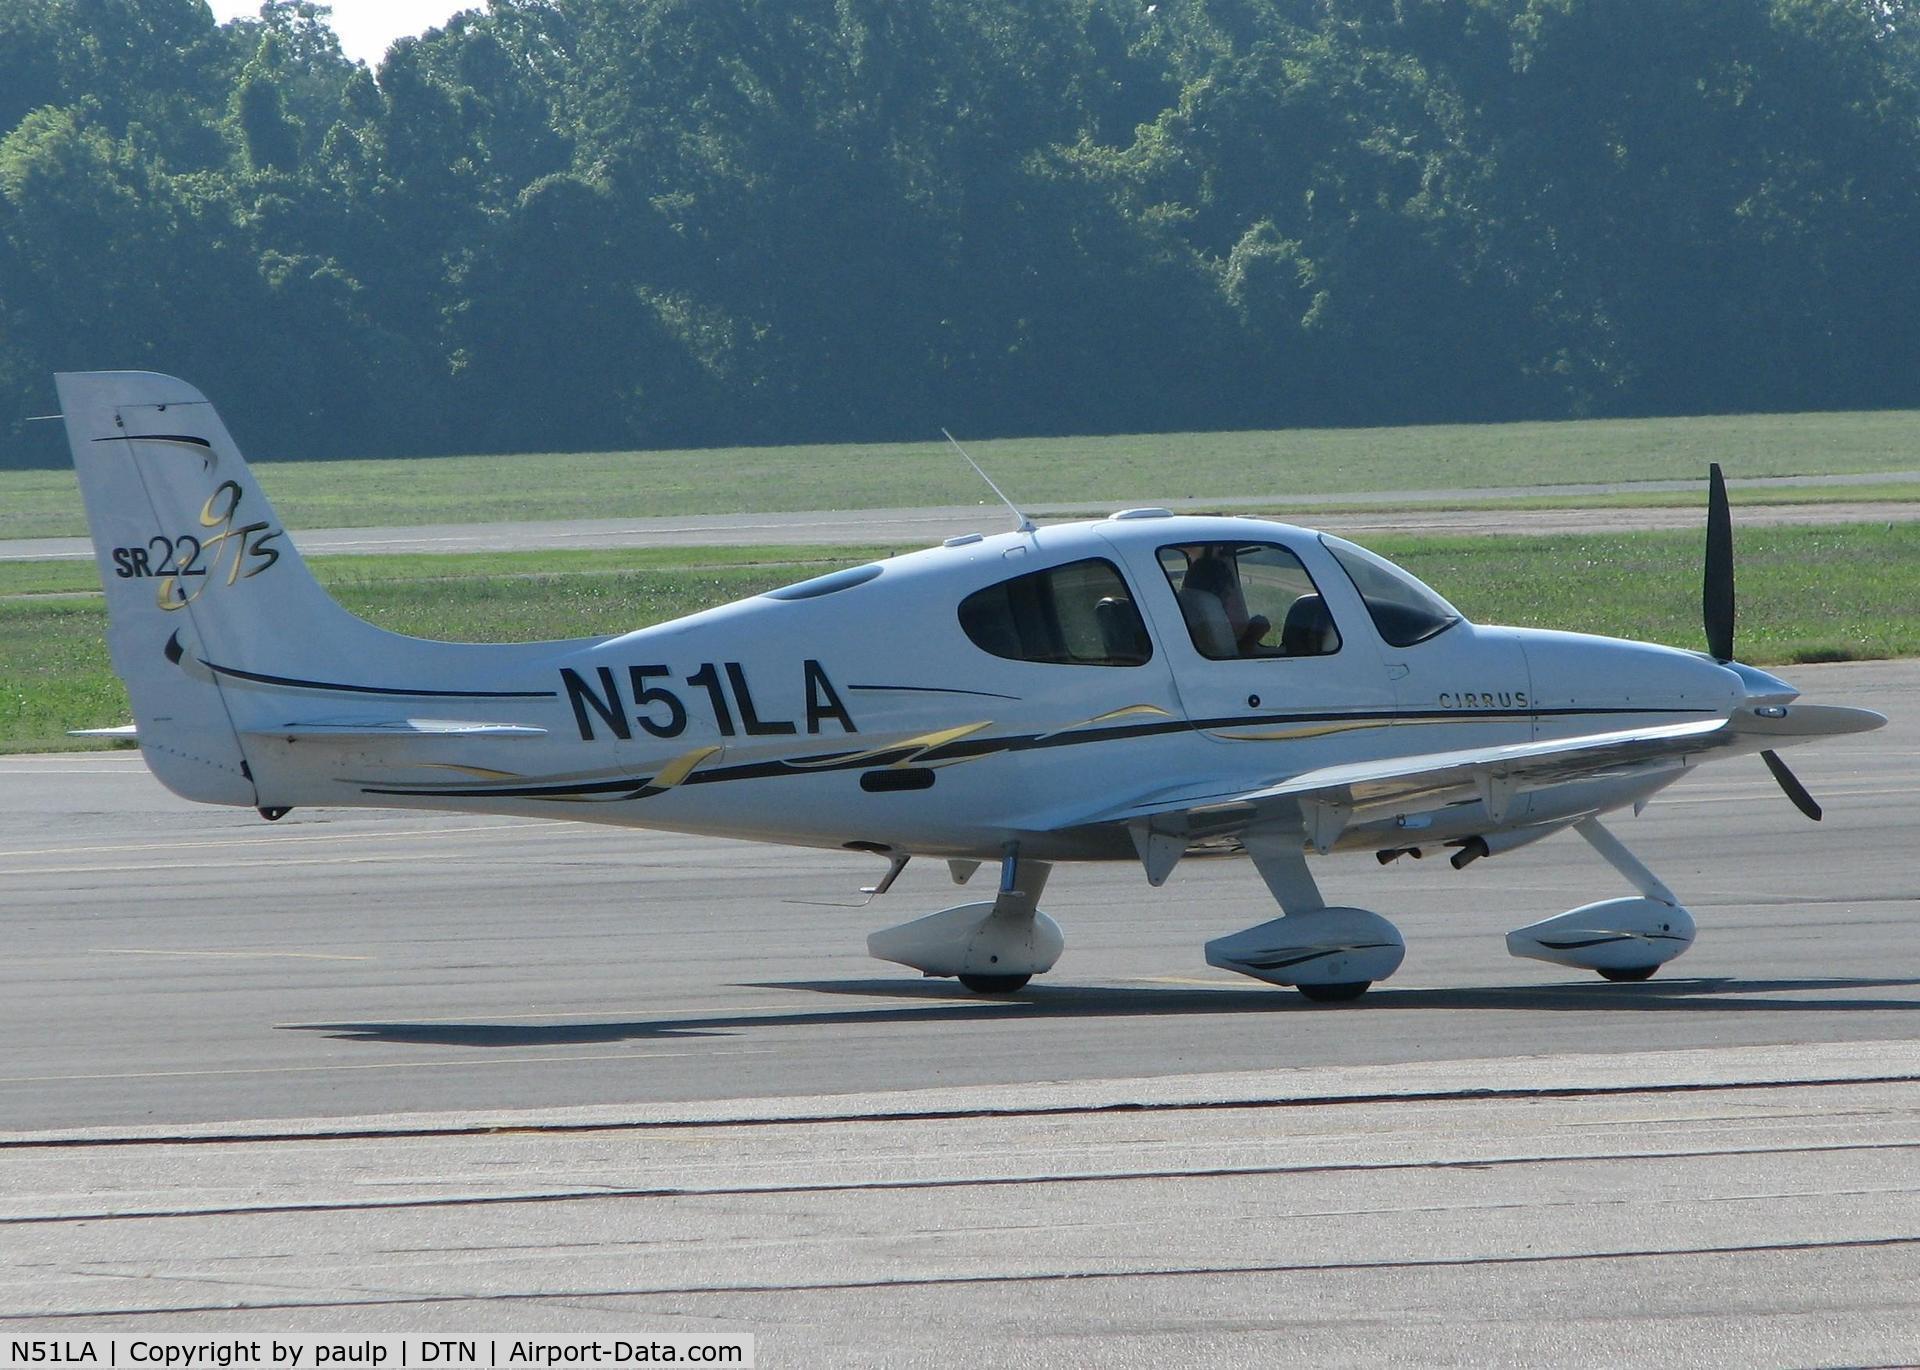 N51LA, 2005 Cirrus SR22 GTS C/N 1756, Parked at the Shreveport Downtown airport.